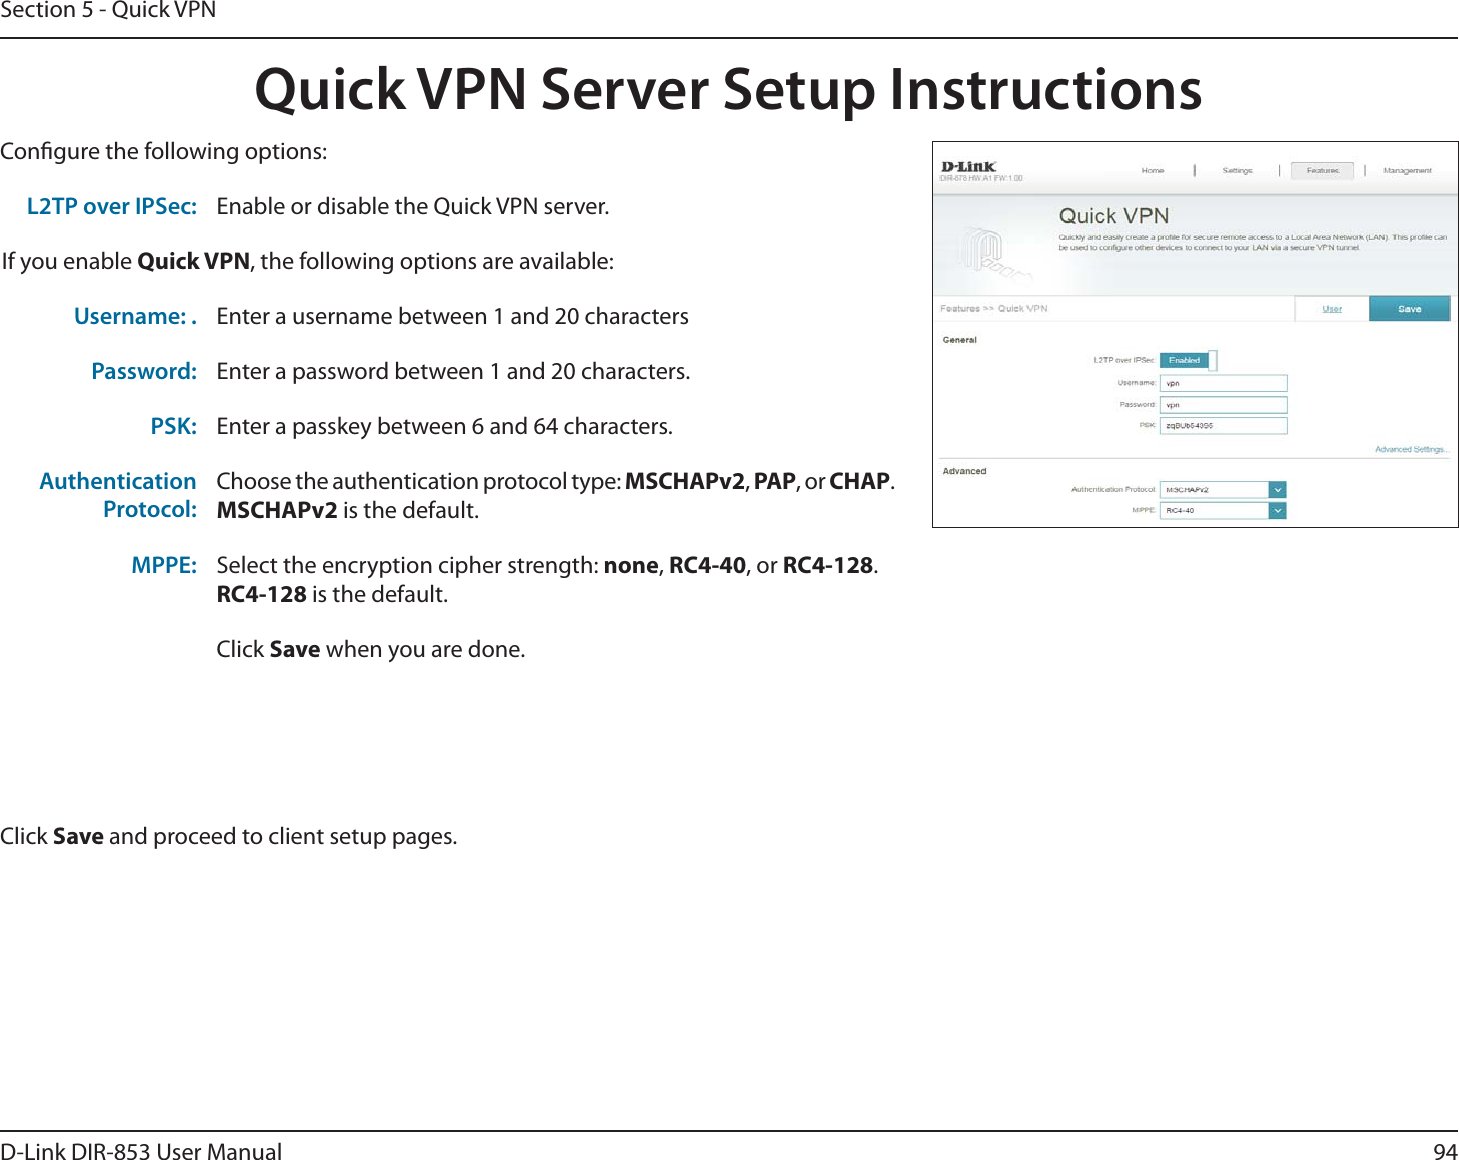 94D-Link DIR-853 User ManualSection 5 - Quick VPNQuick VPN Server Setup InstructionsCongure the following options:Click Save and proceed to client setup pages.L2TP over IPSec: Enable or disable the Quick VPN server.If you enable Quick VPN, the following options are available:Username: . Enter a username between 1 and 20 charactersPassword: Enter a password between 1 and 20 characters.PSK: Enter a passkey between 6 and 64 characters.AuthenticationProtocol:Choose the authentication protocol type: MSCHAPv2, PAP, or CHAP.MSCHAPv2 is the default.MPPE: Select the encryption cipher strength: none, RC4-40, or RC4-128.RC4-128 is the default.Click Save when you are done.